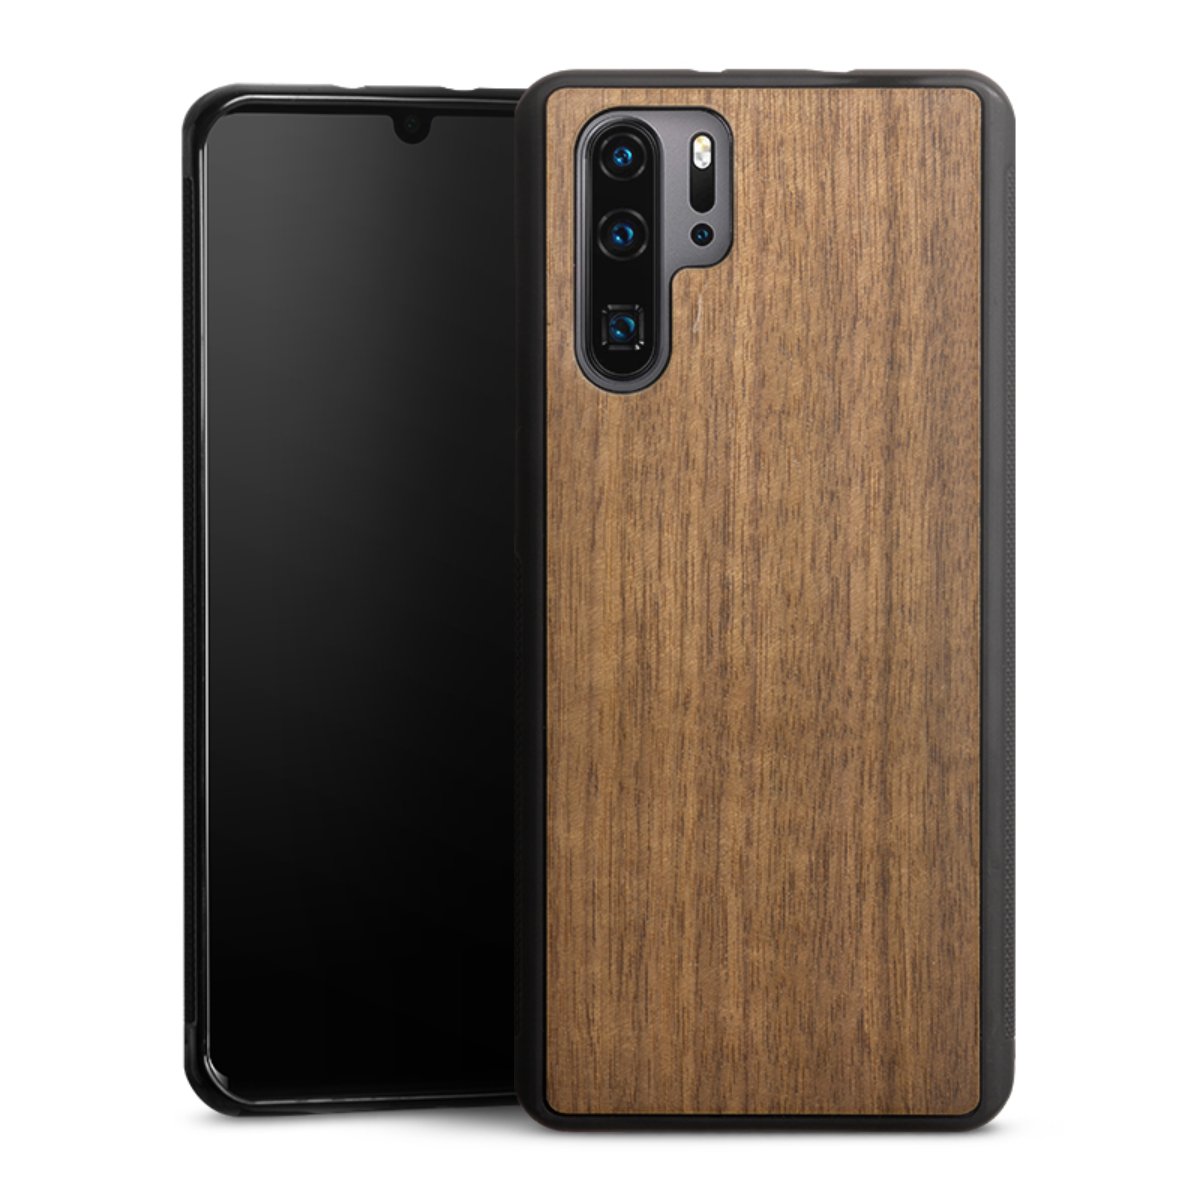 Wooden Hard Case pour Huawei P30 Pro New Edition